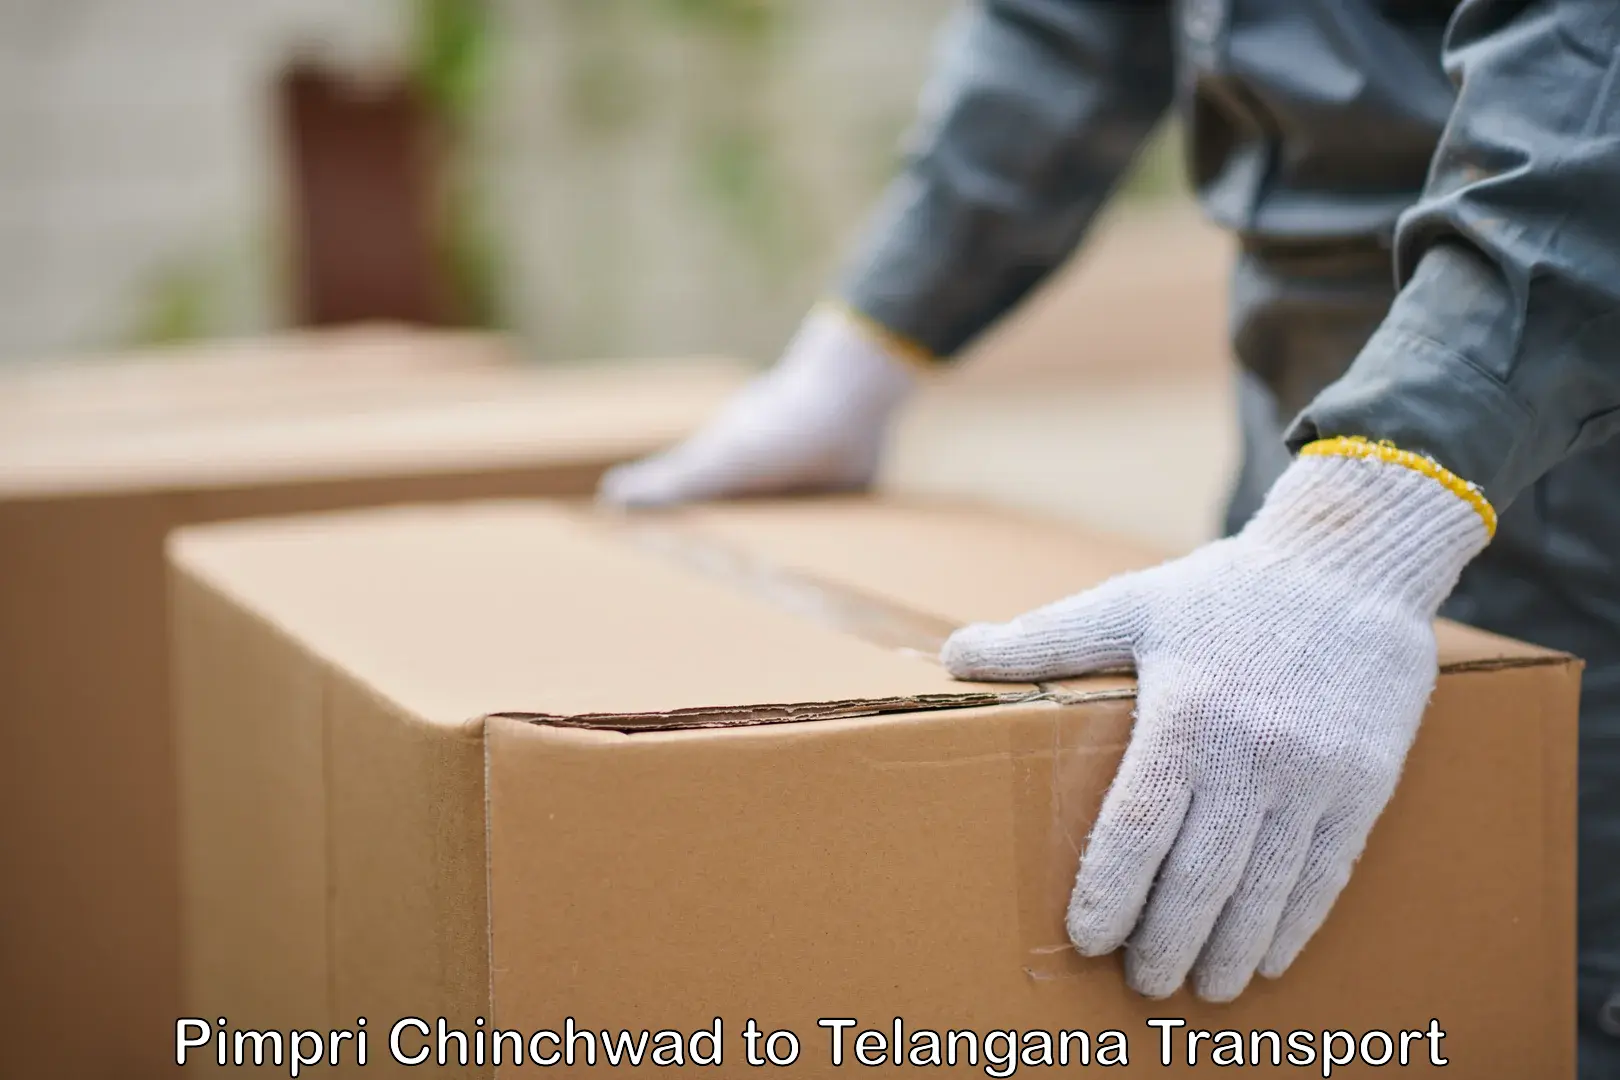 Express transport services in Pimpri Chinchwad to Telangana